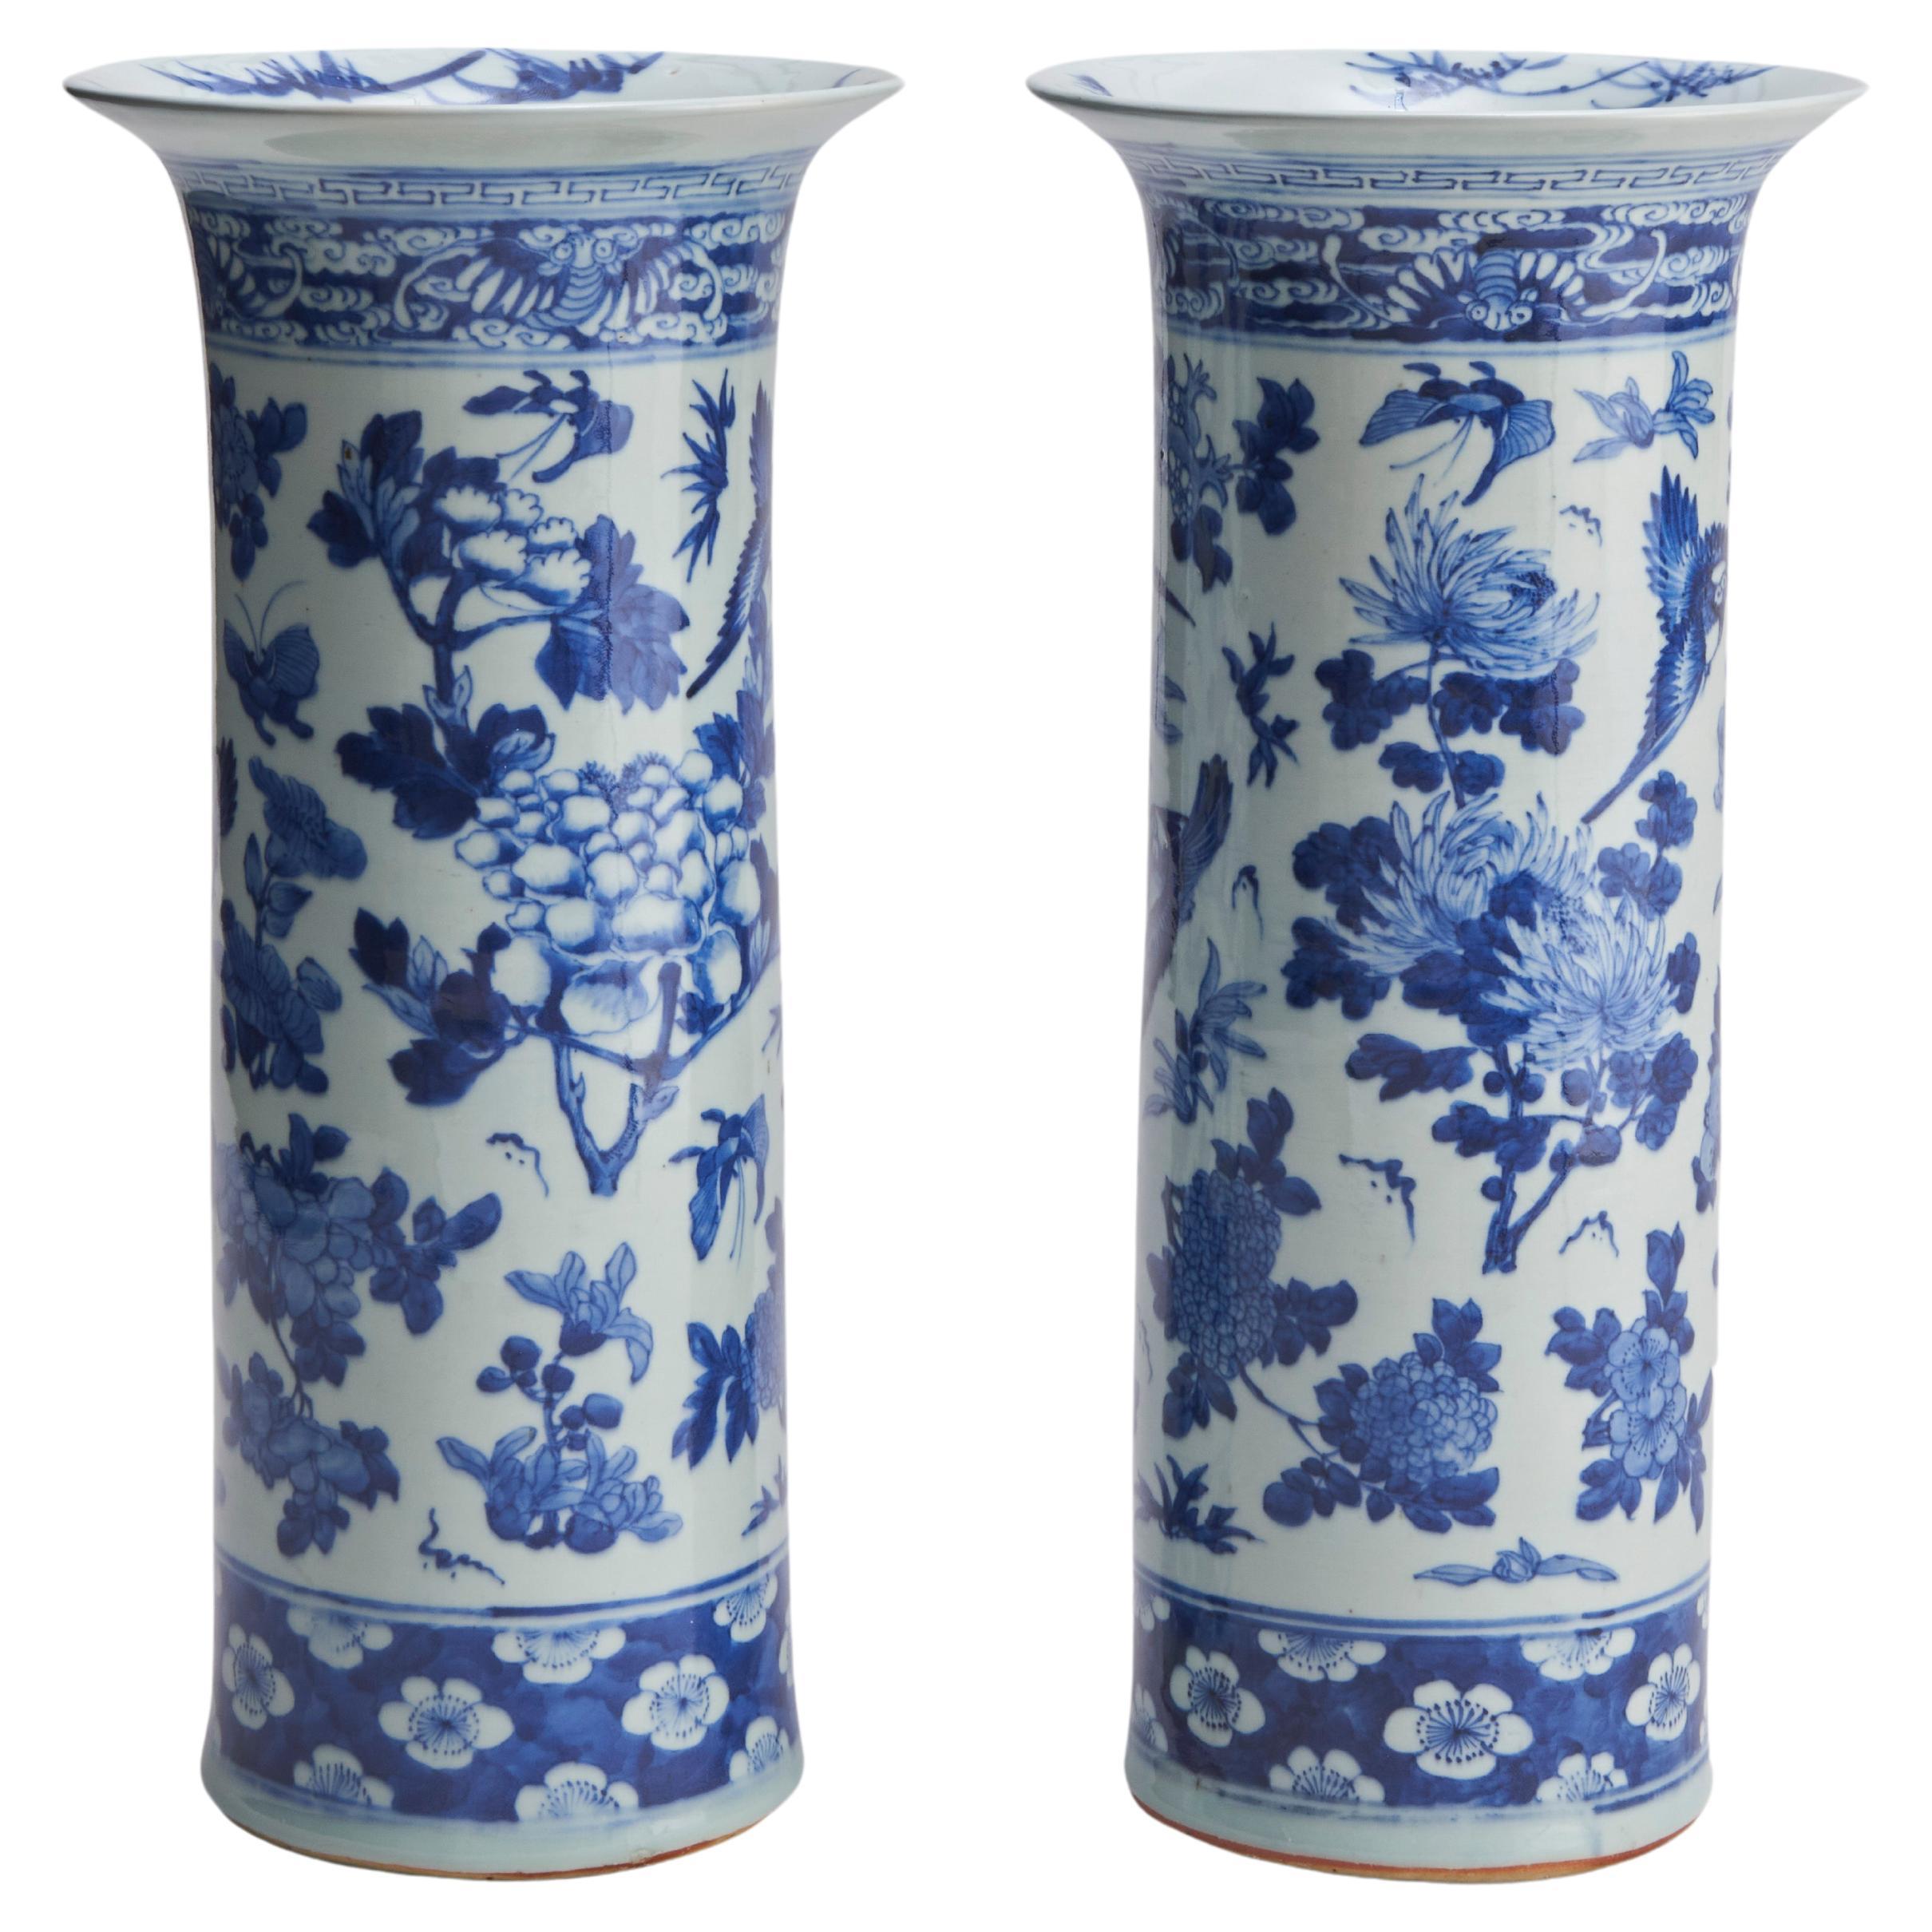 A stunning pair of 19th Century flare-topped blue and white porcelain vases (Cir